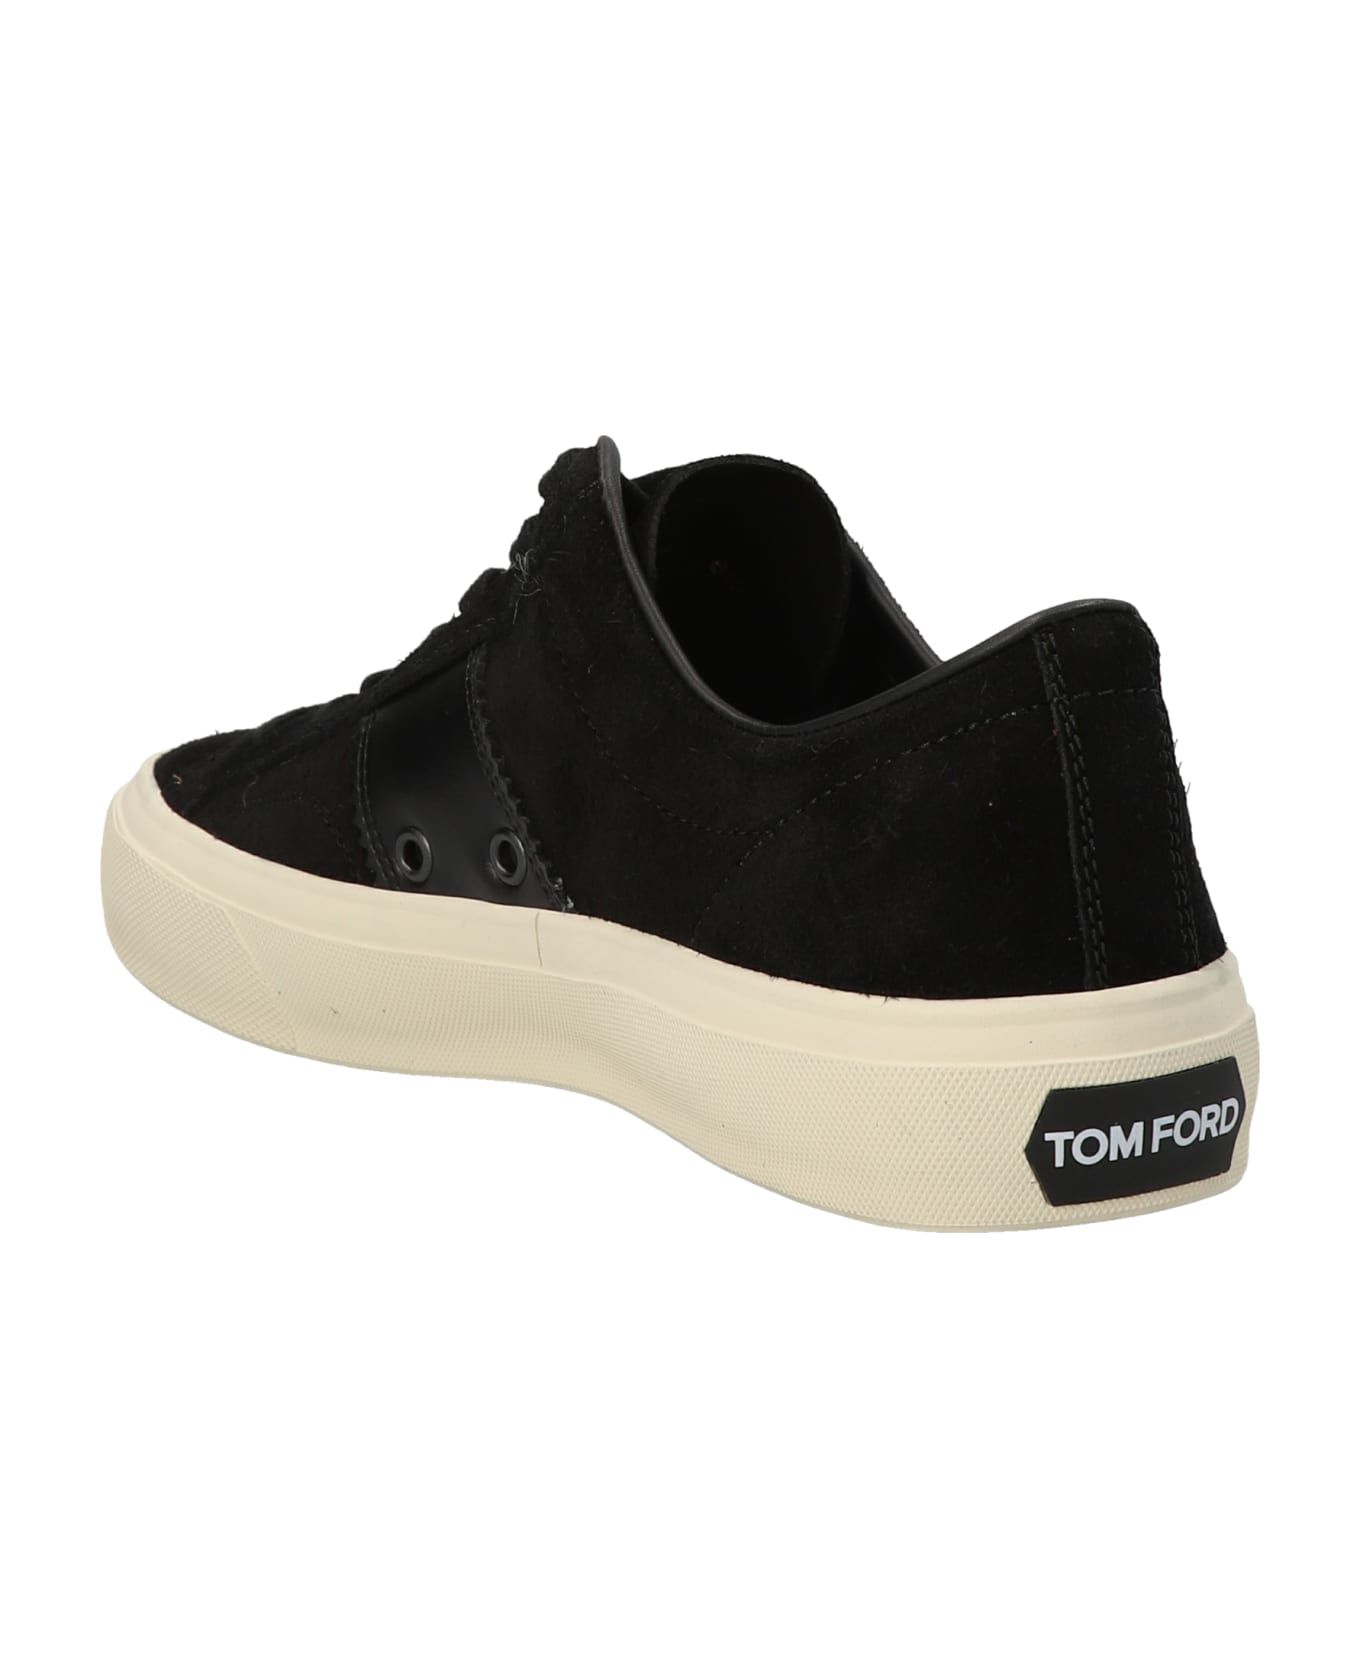 Tom Ford Suede Sneakers - BLACK CREAM スニーカー